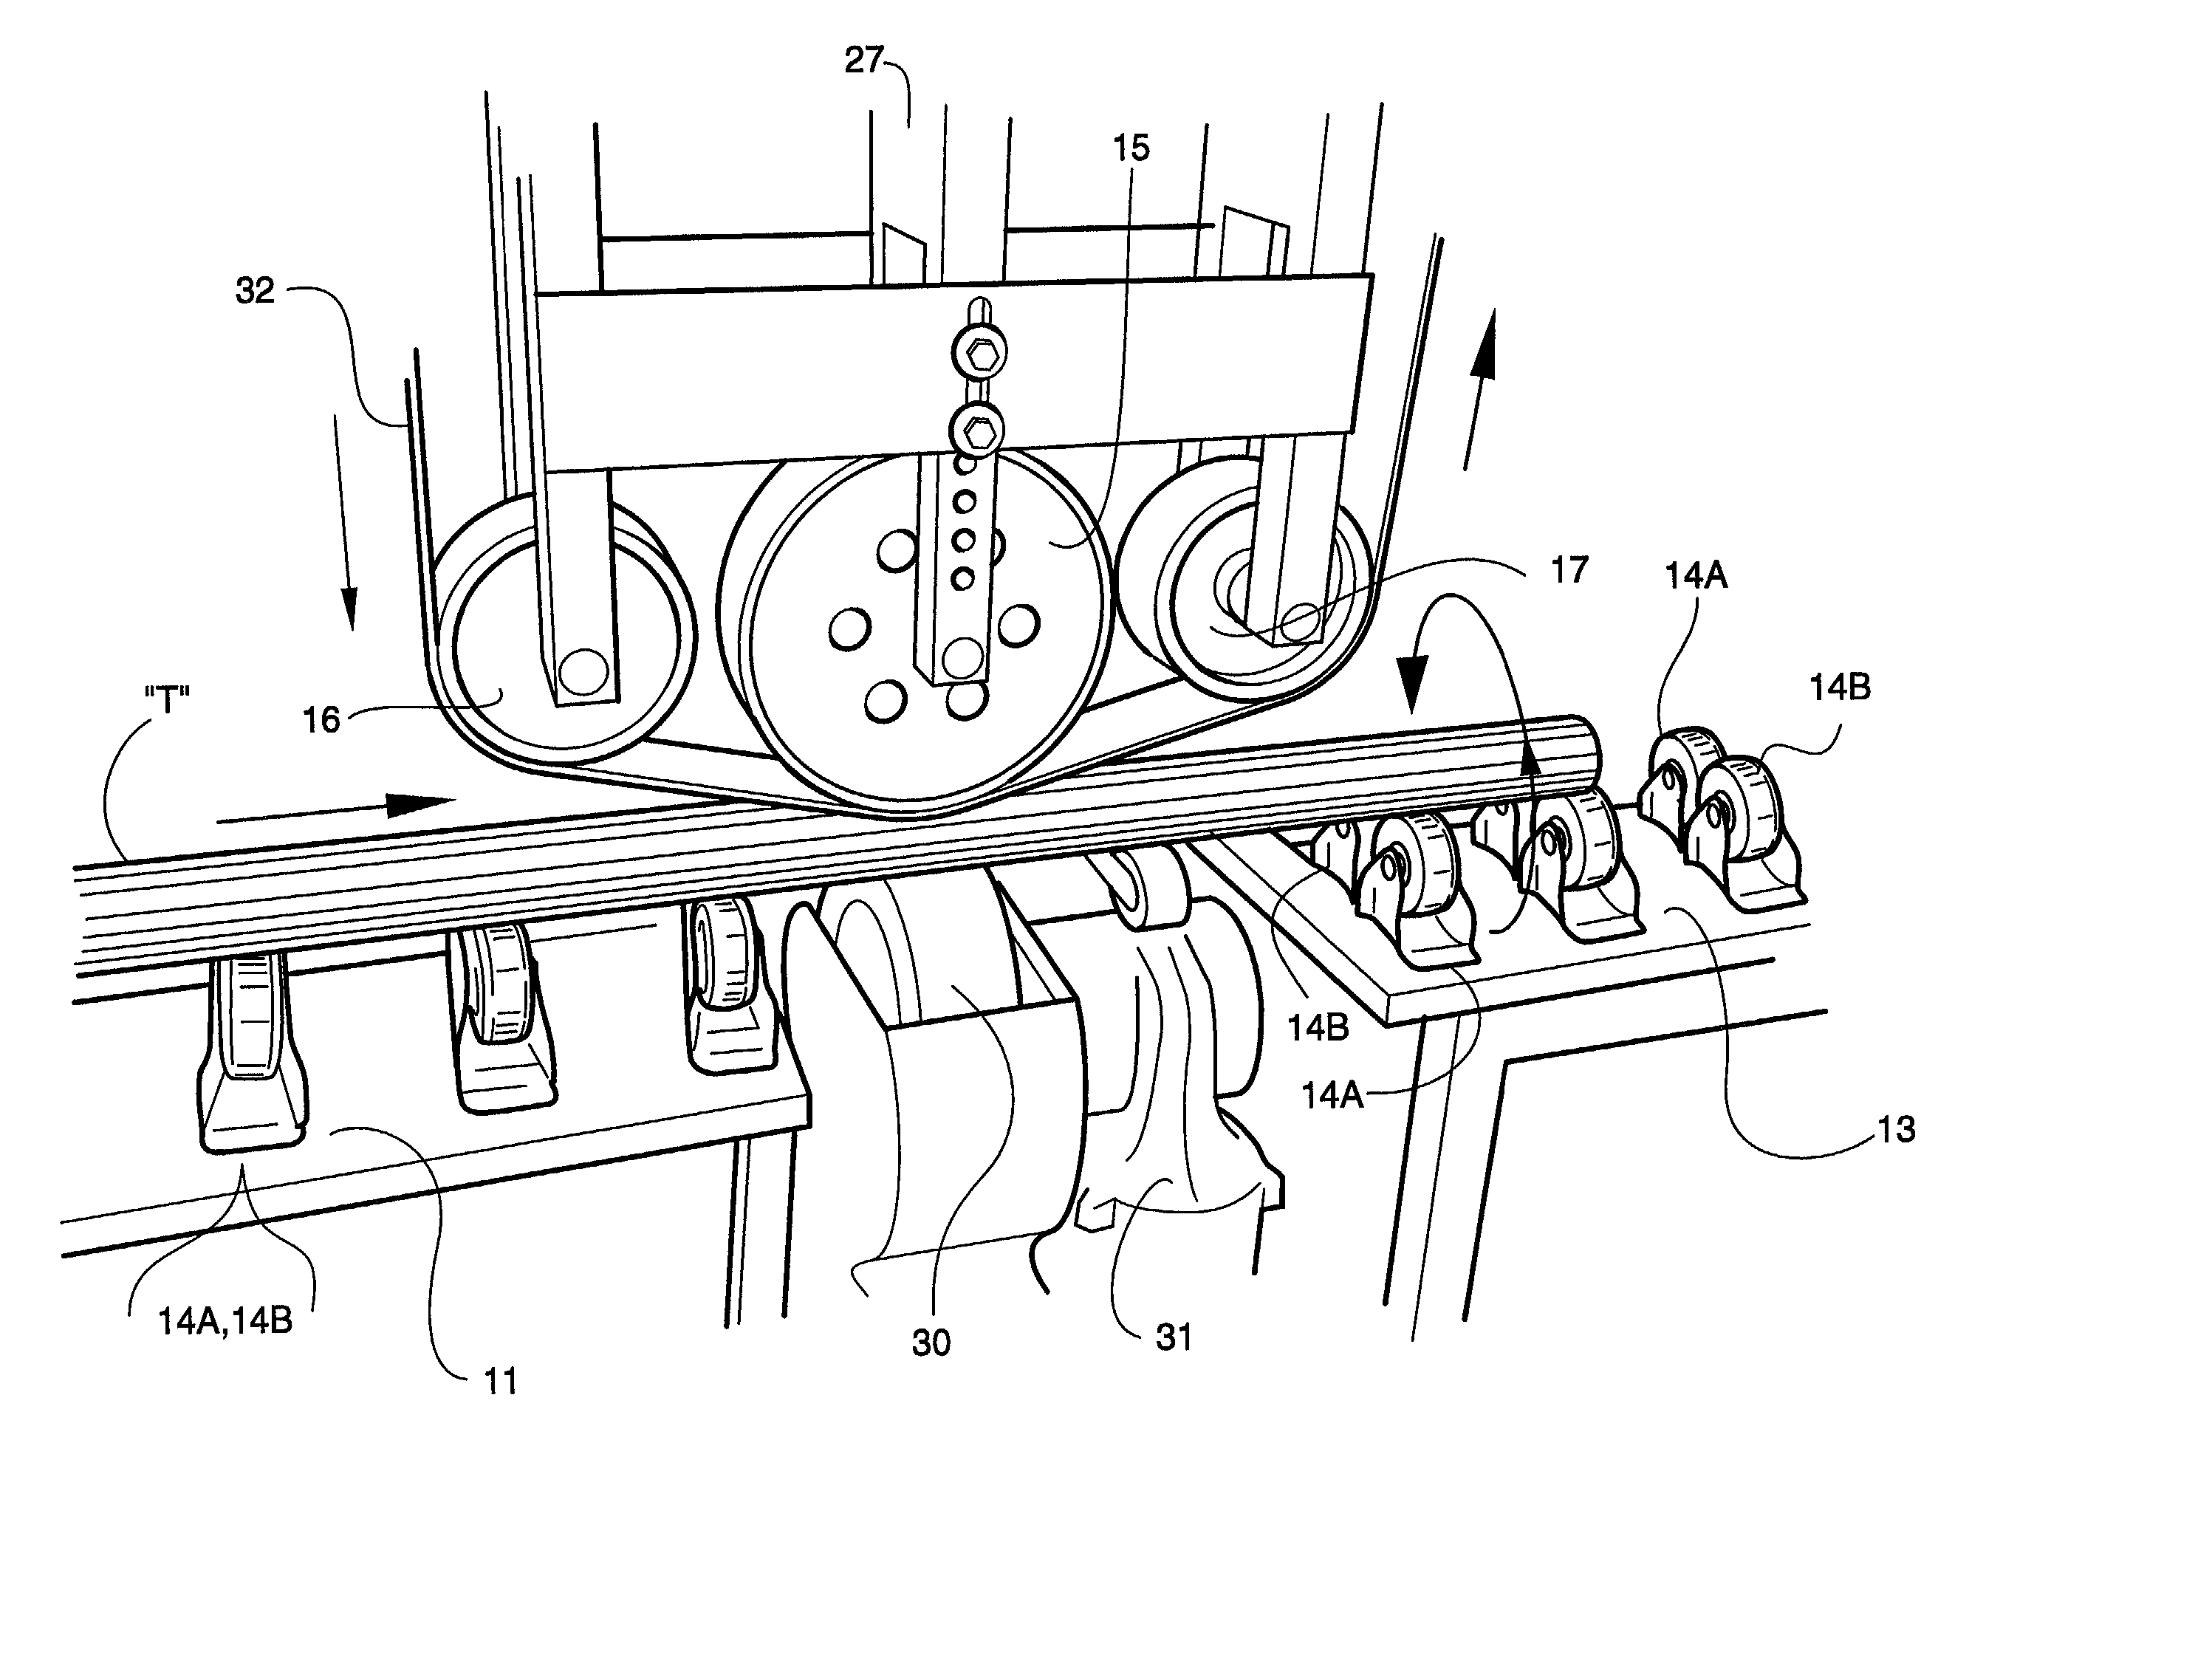 Apparatus for in-line surface polishing of cylindrical stock such as stainless steel tubing, and method